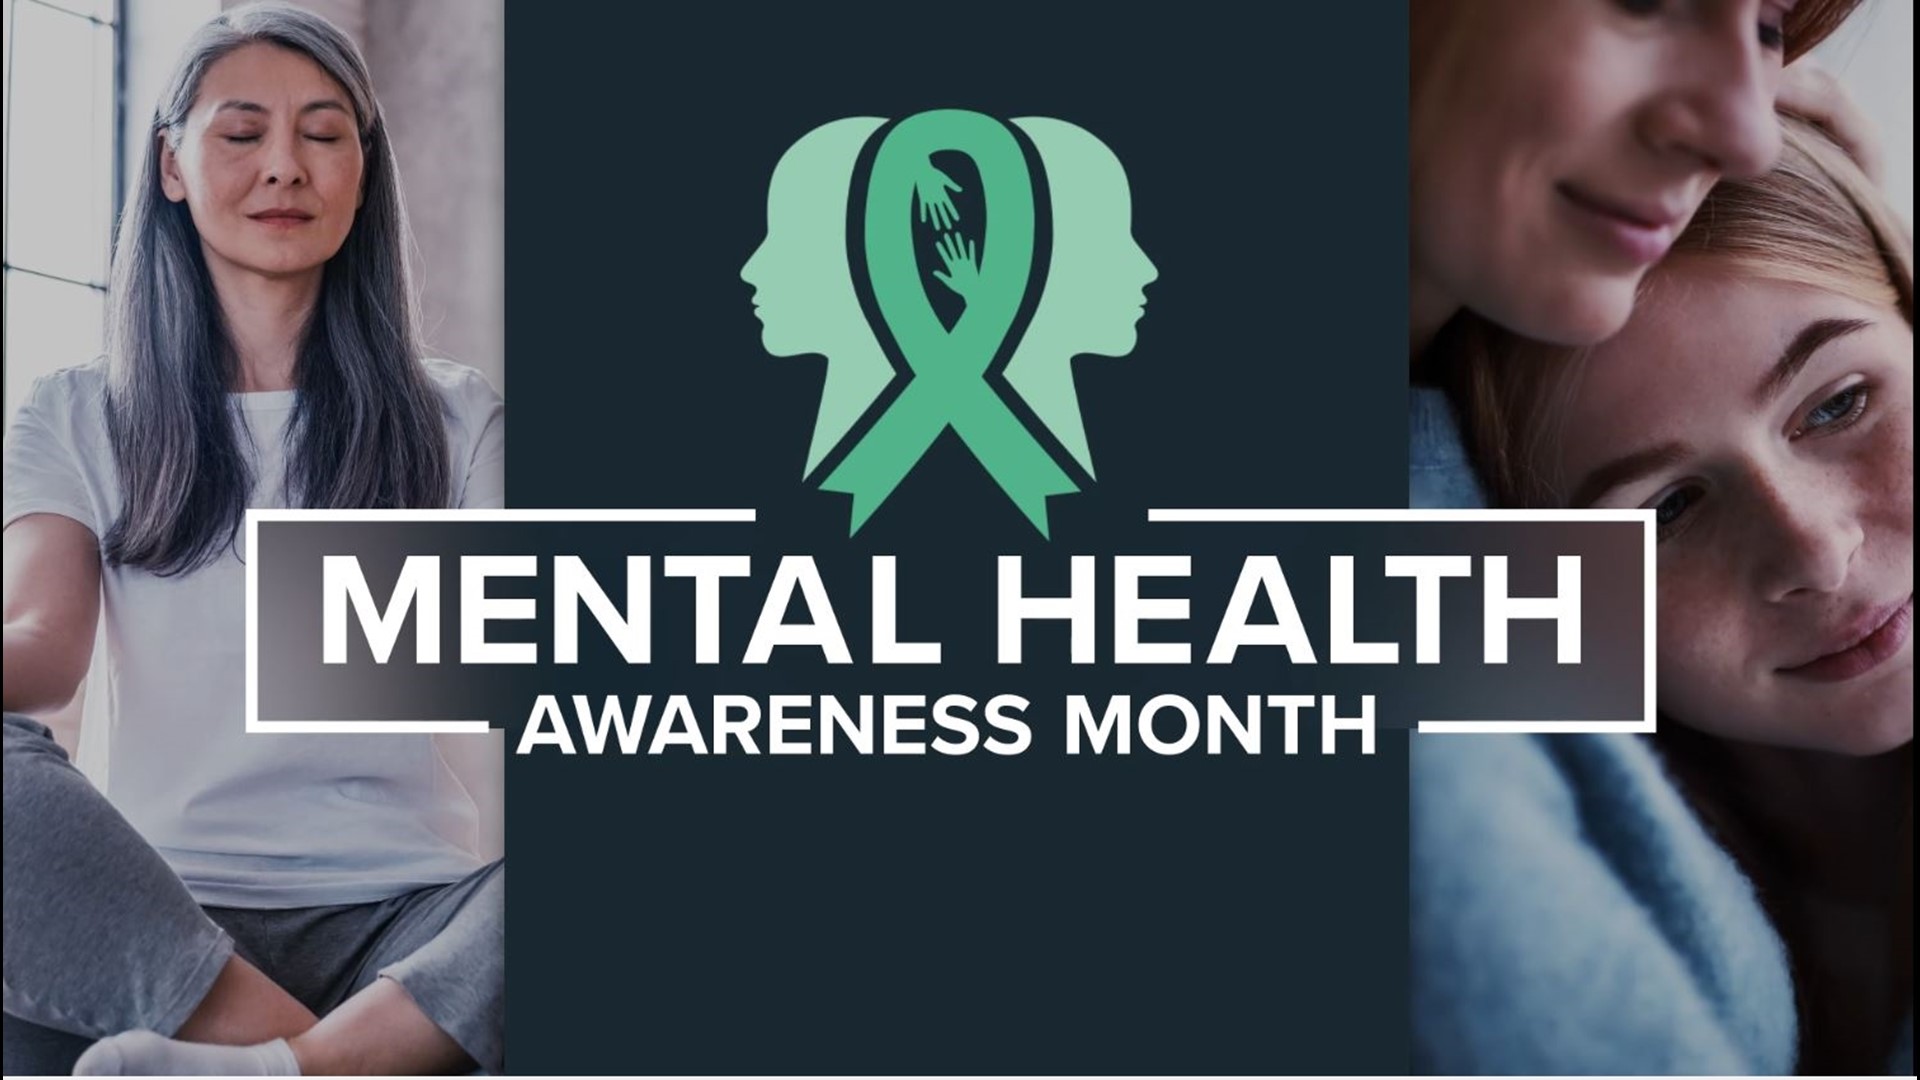 May is mental health awareness month, a time to fight the stigma and educate others on mental health issues. A look at personal stories and ways to provide support.